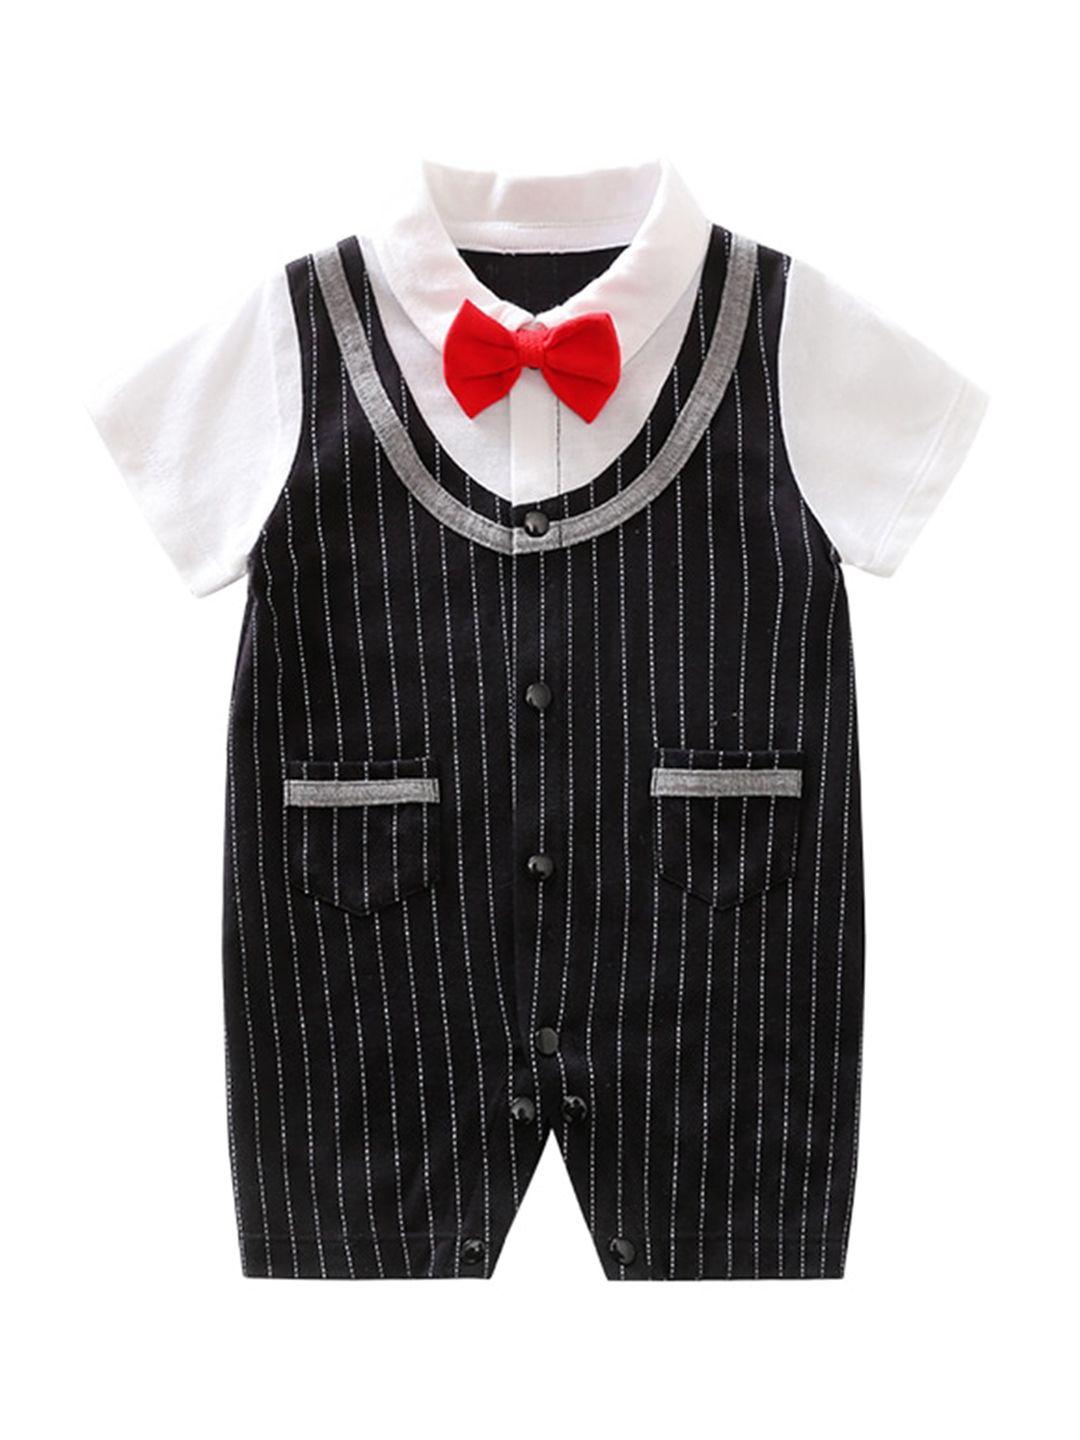 stylecast infant boys black & white striped cotton rompers